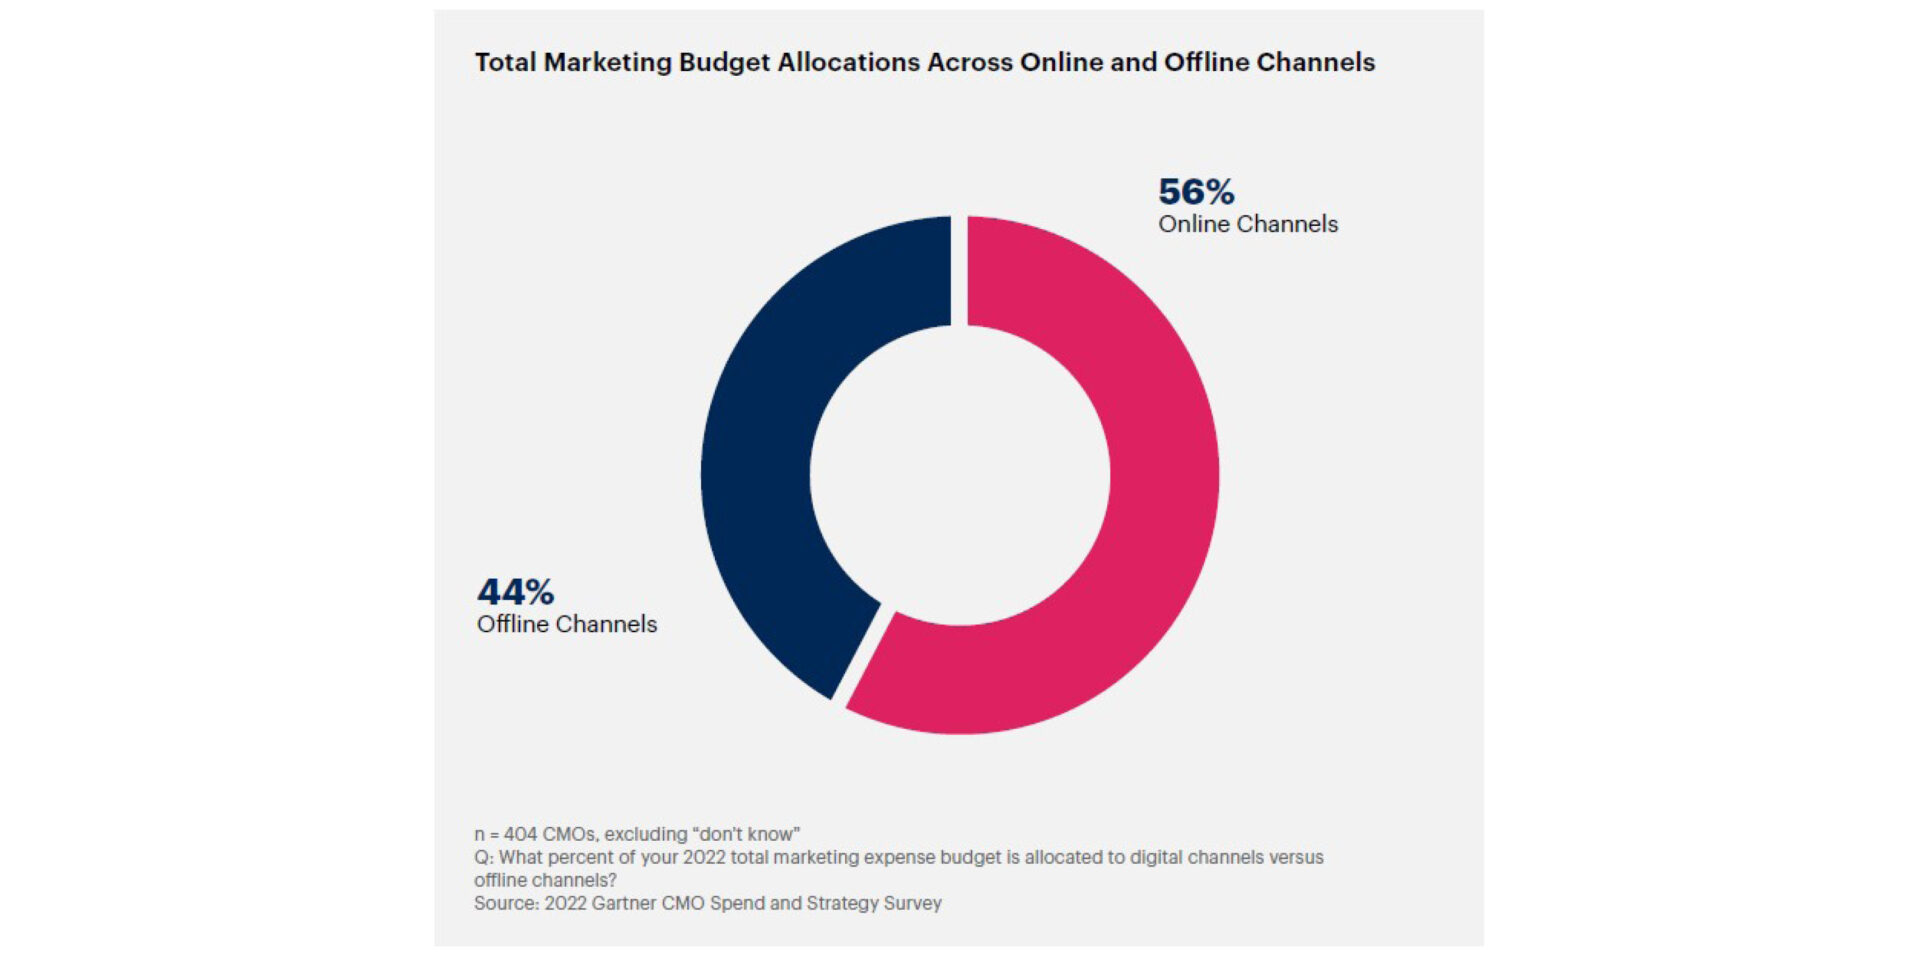 Total marketing budget allocations across online and offline channels